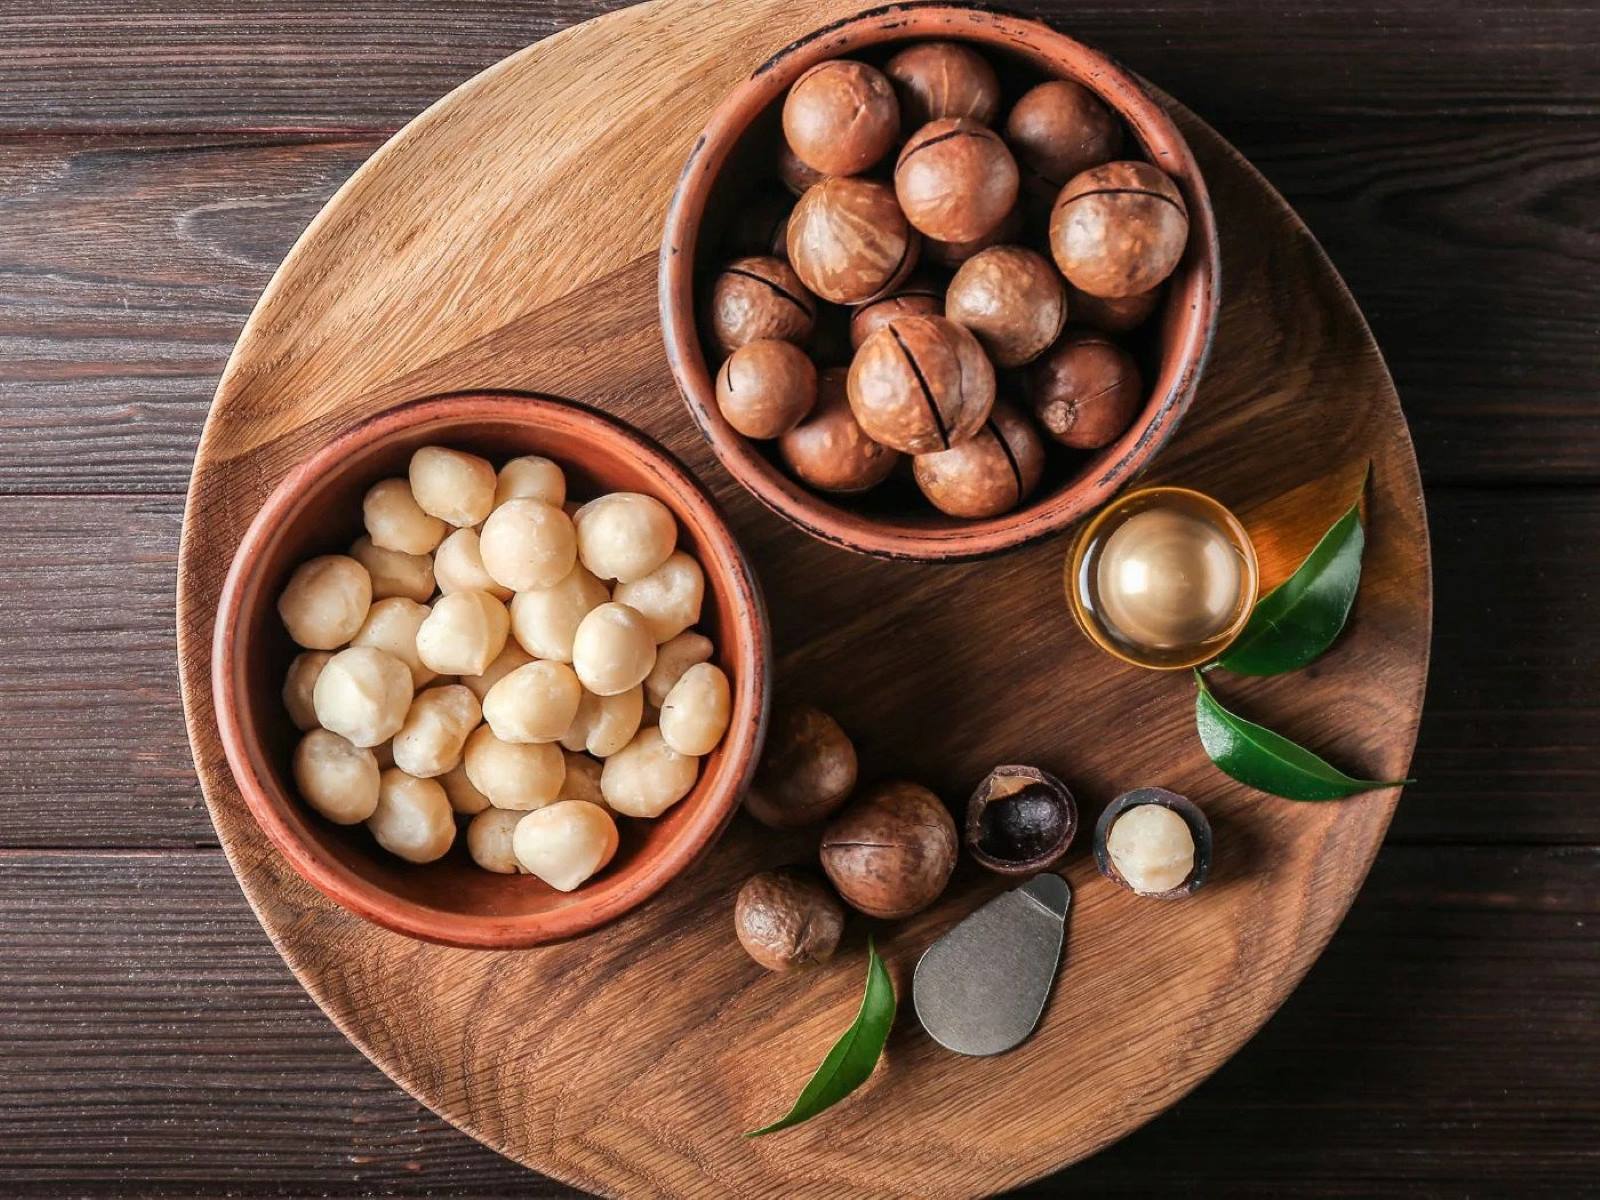 How To Store Macadamia Nuts